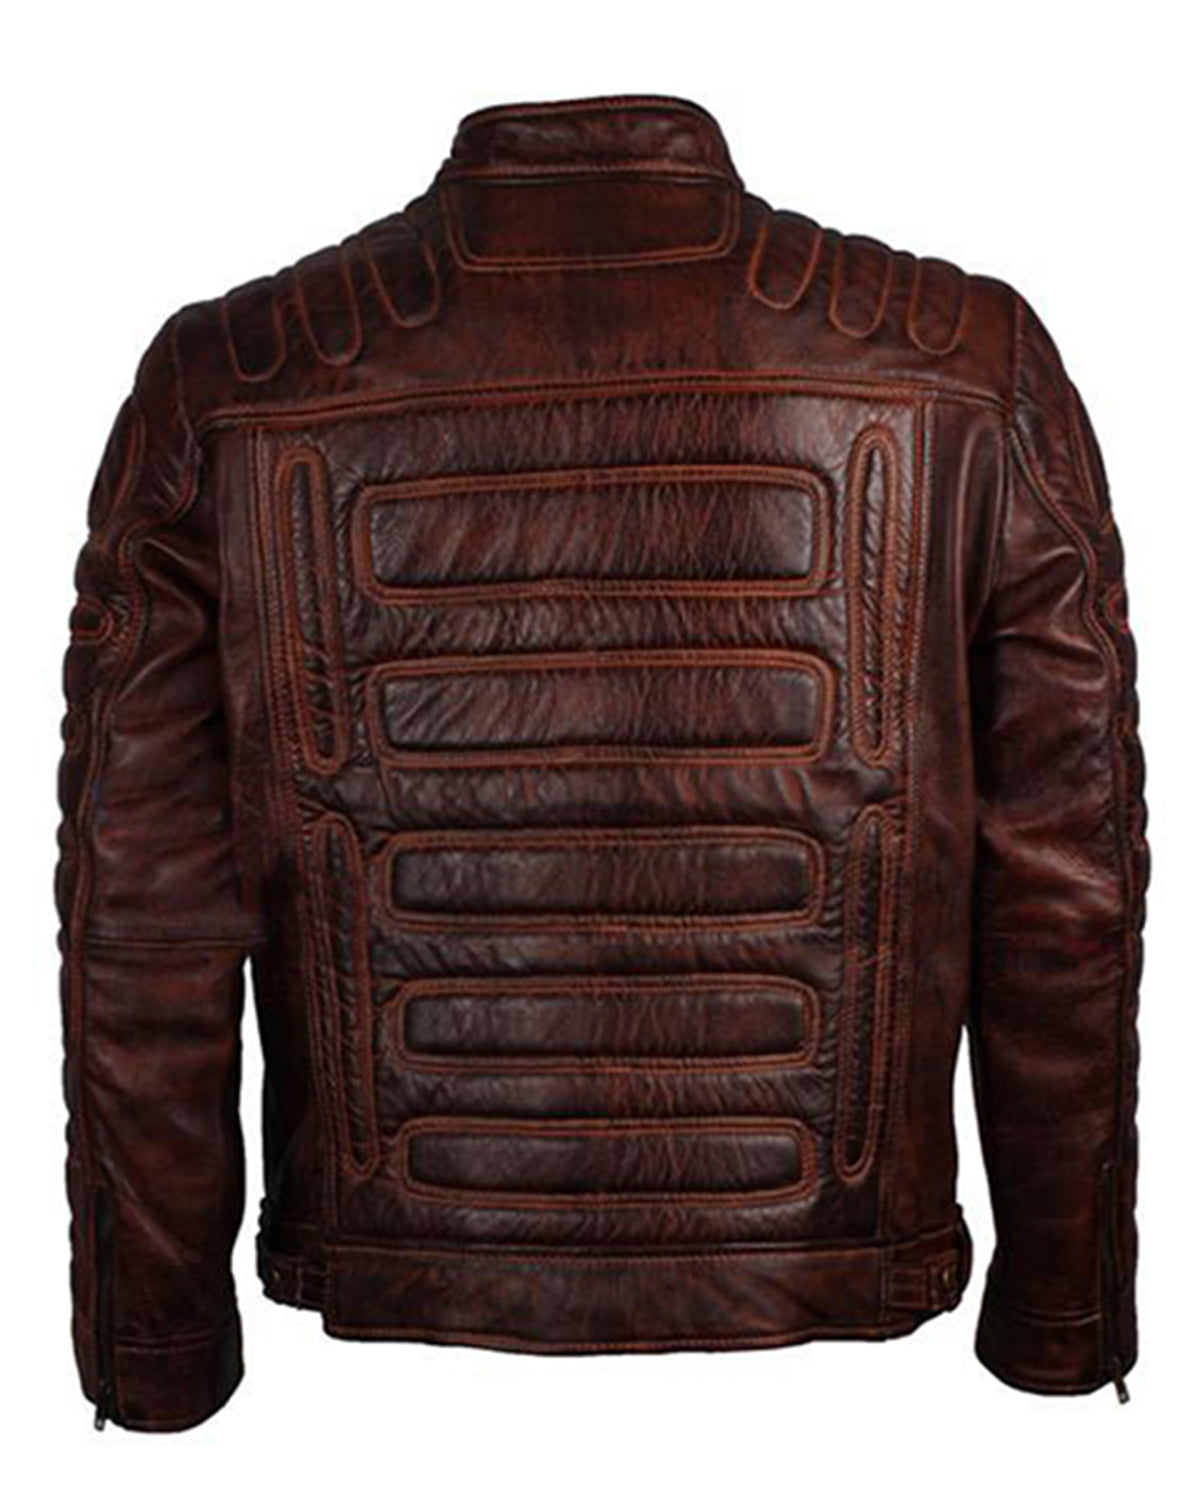 MotorCycleJackets Cafe Racer Distressed Motorcycle Brown Leather Jacket For Men